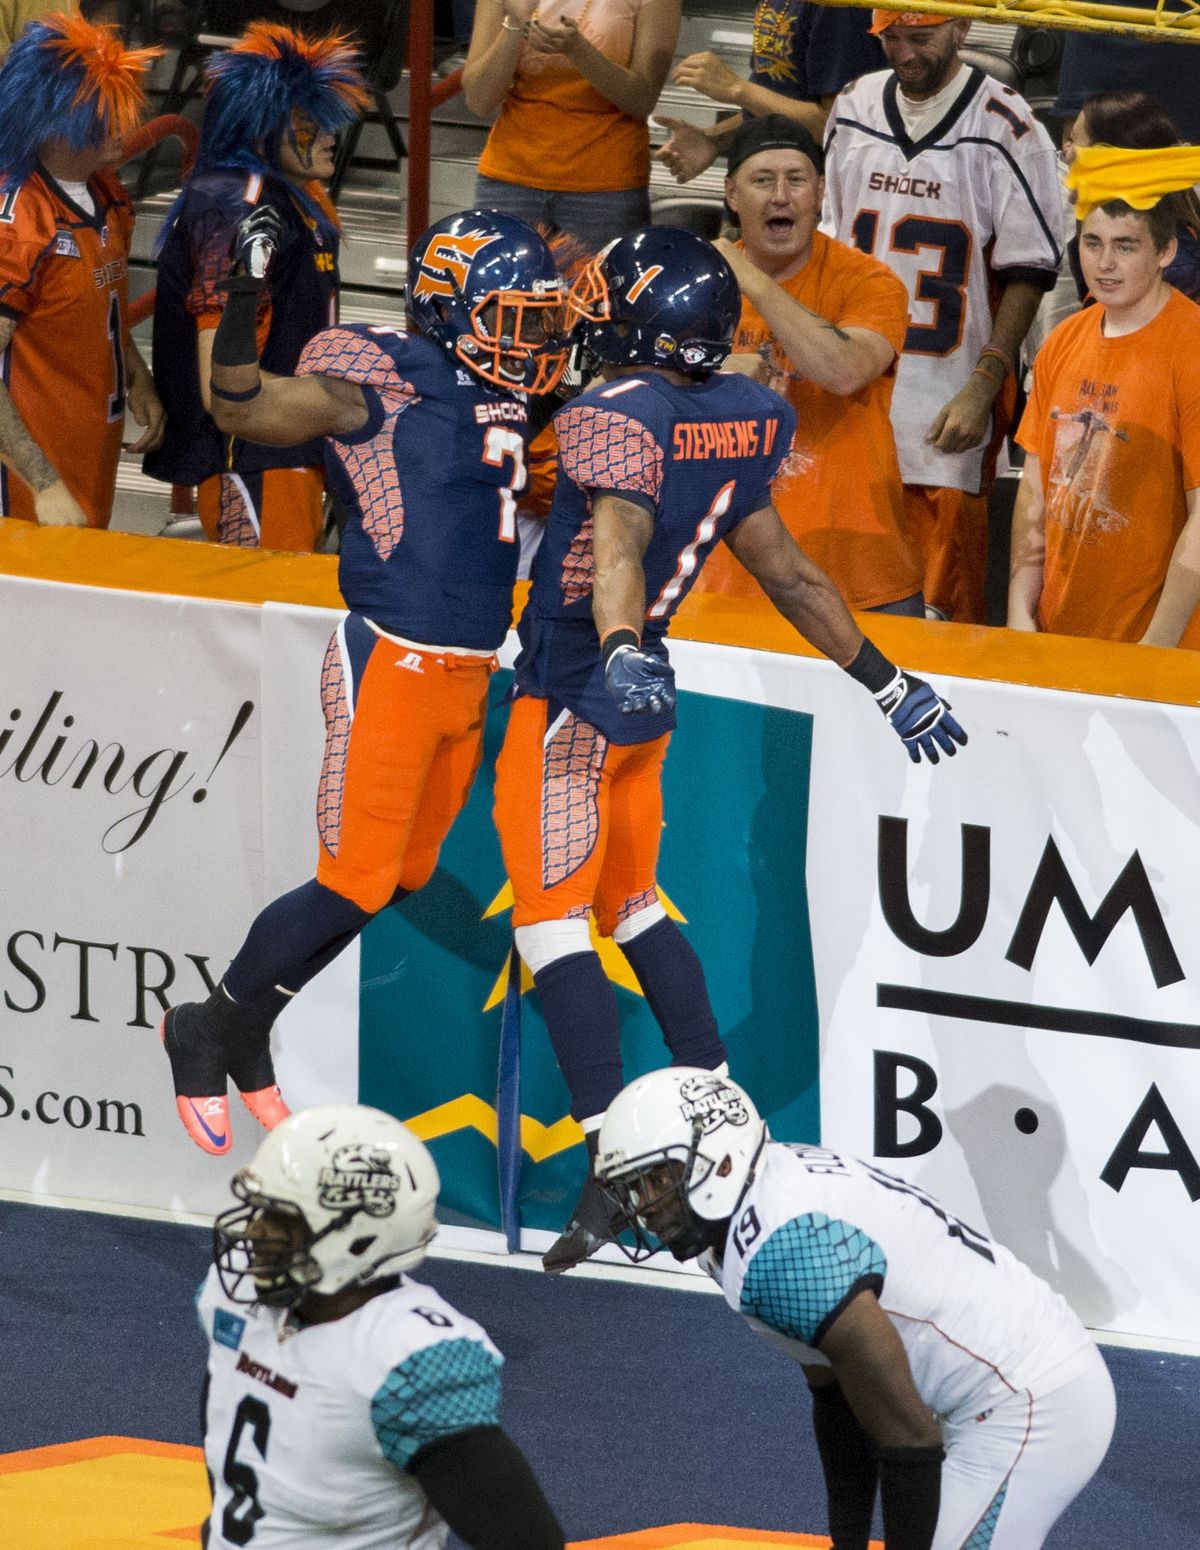 Shock’s Mike Washington (7) celebrates a fourth-quarter touchdown with teammate Paul Stephens. (Colin Mulvany)